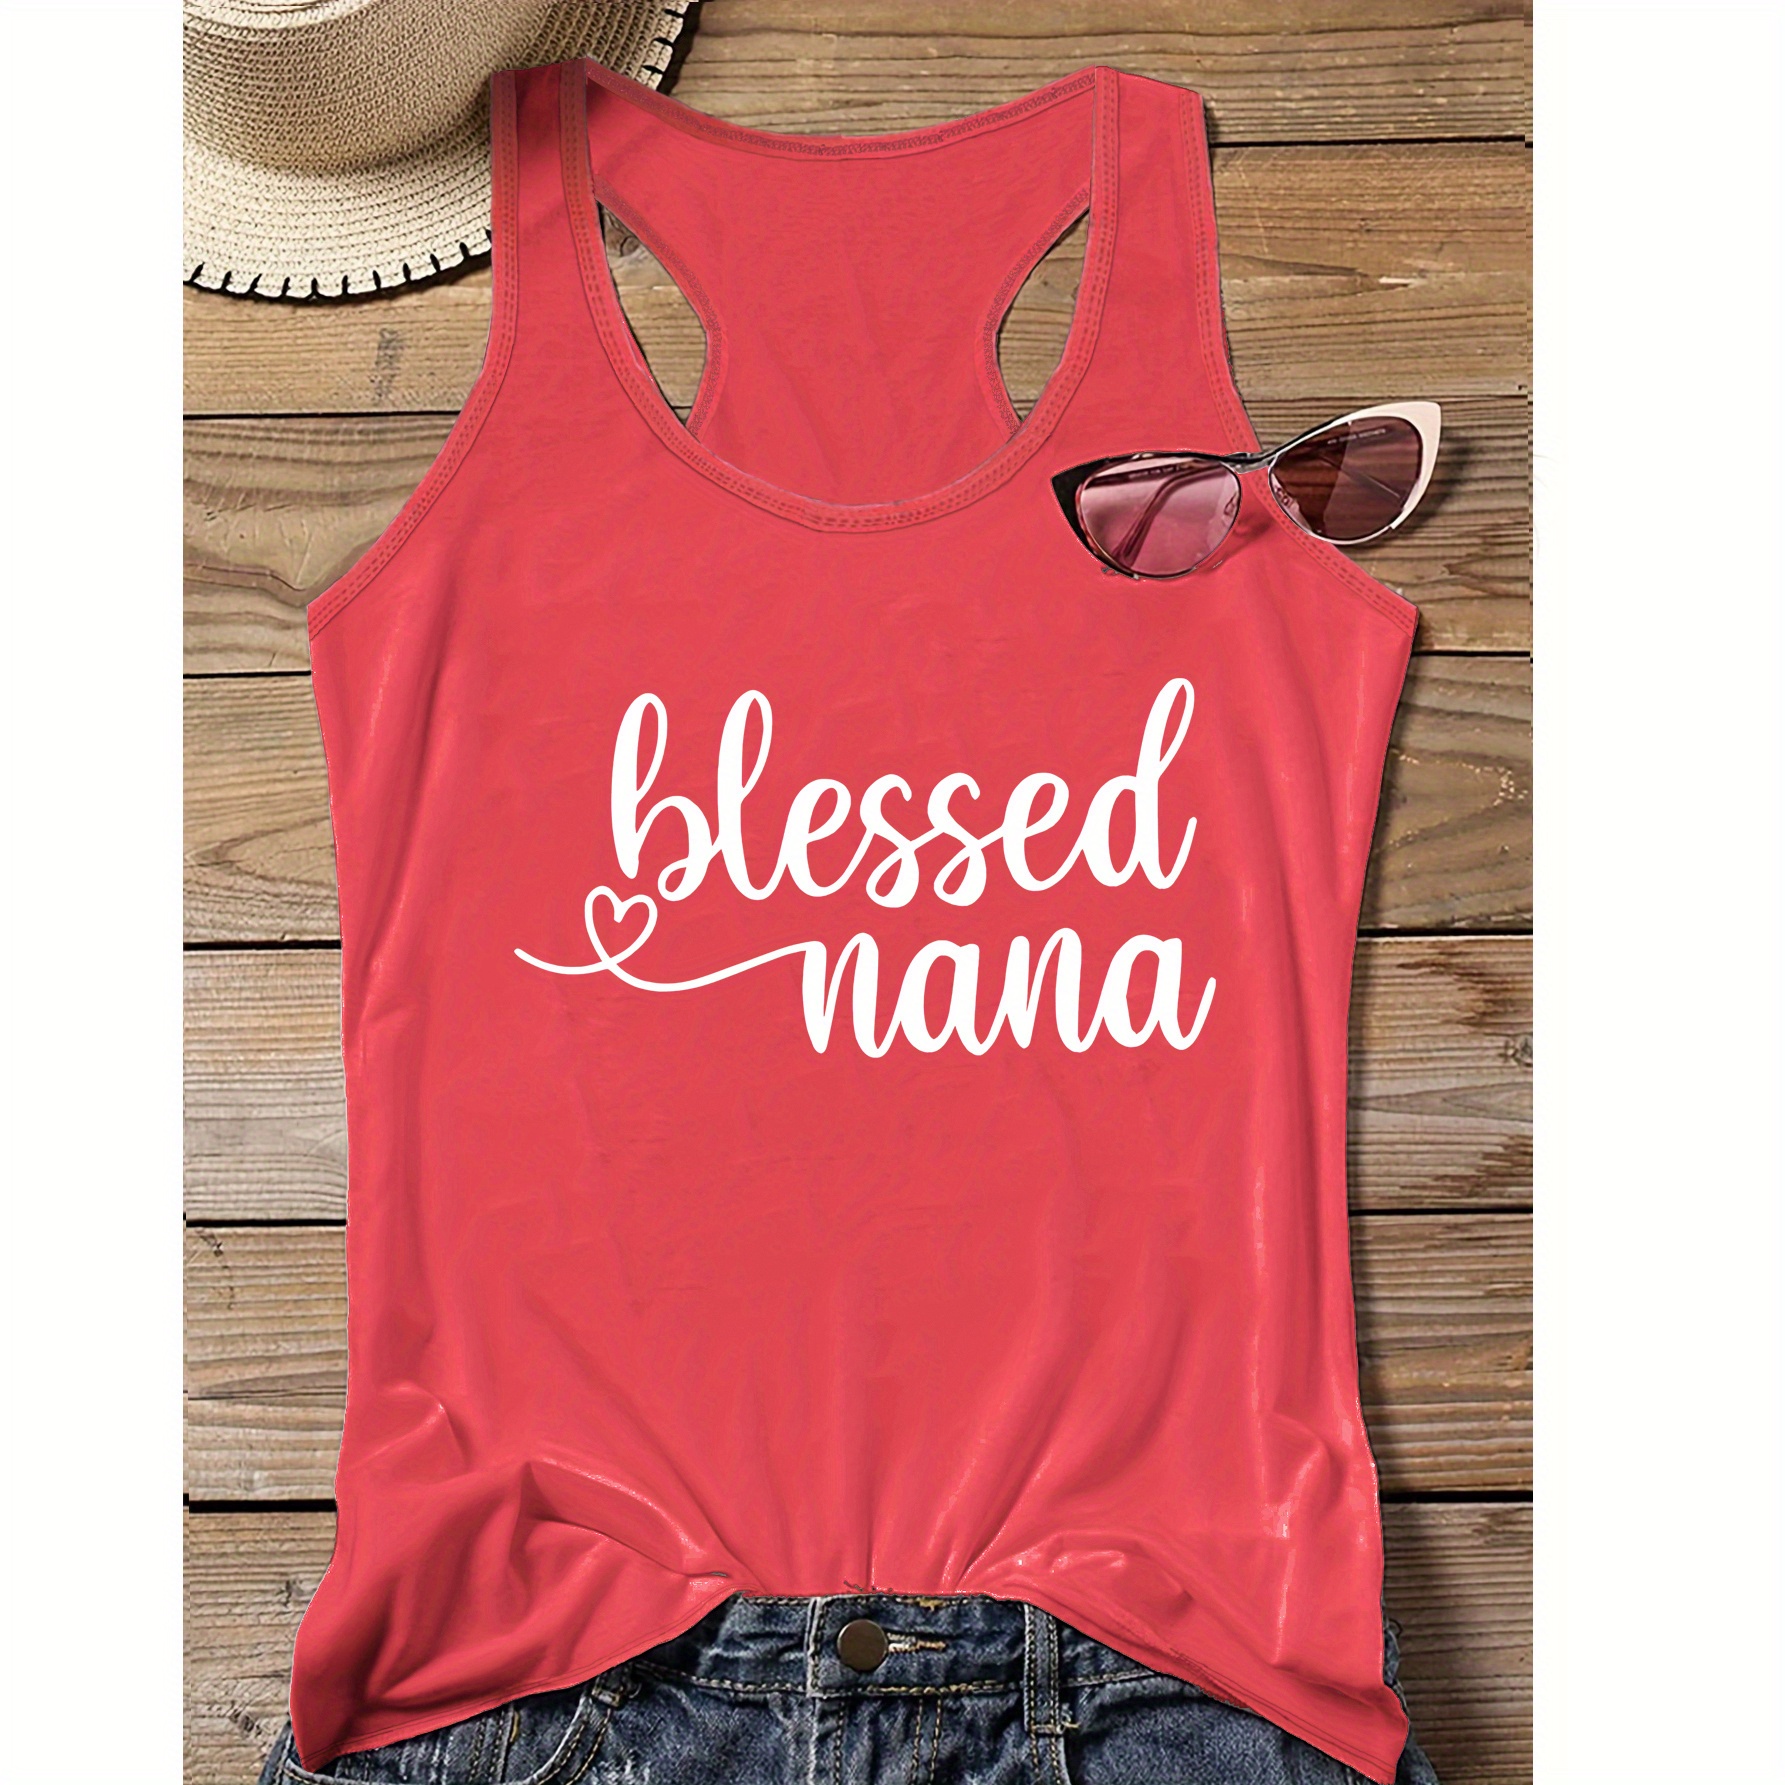 

Plus Size Casual Sporty Blessed Nana Print Tank Top, Sleeveless Racer Back Casual Top For Summer & Spring, Women's Clothing